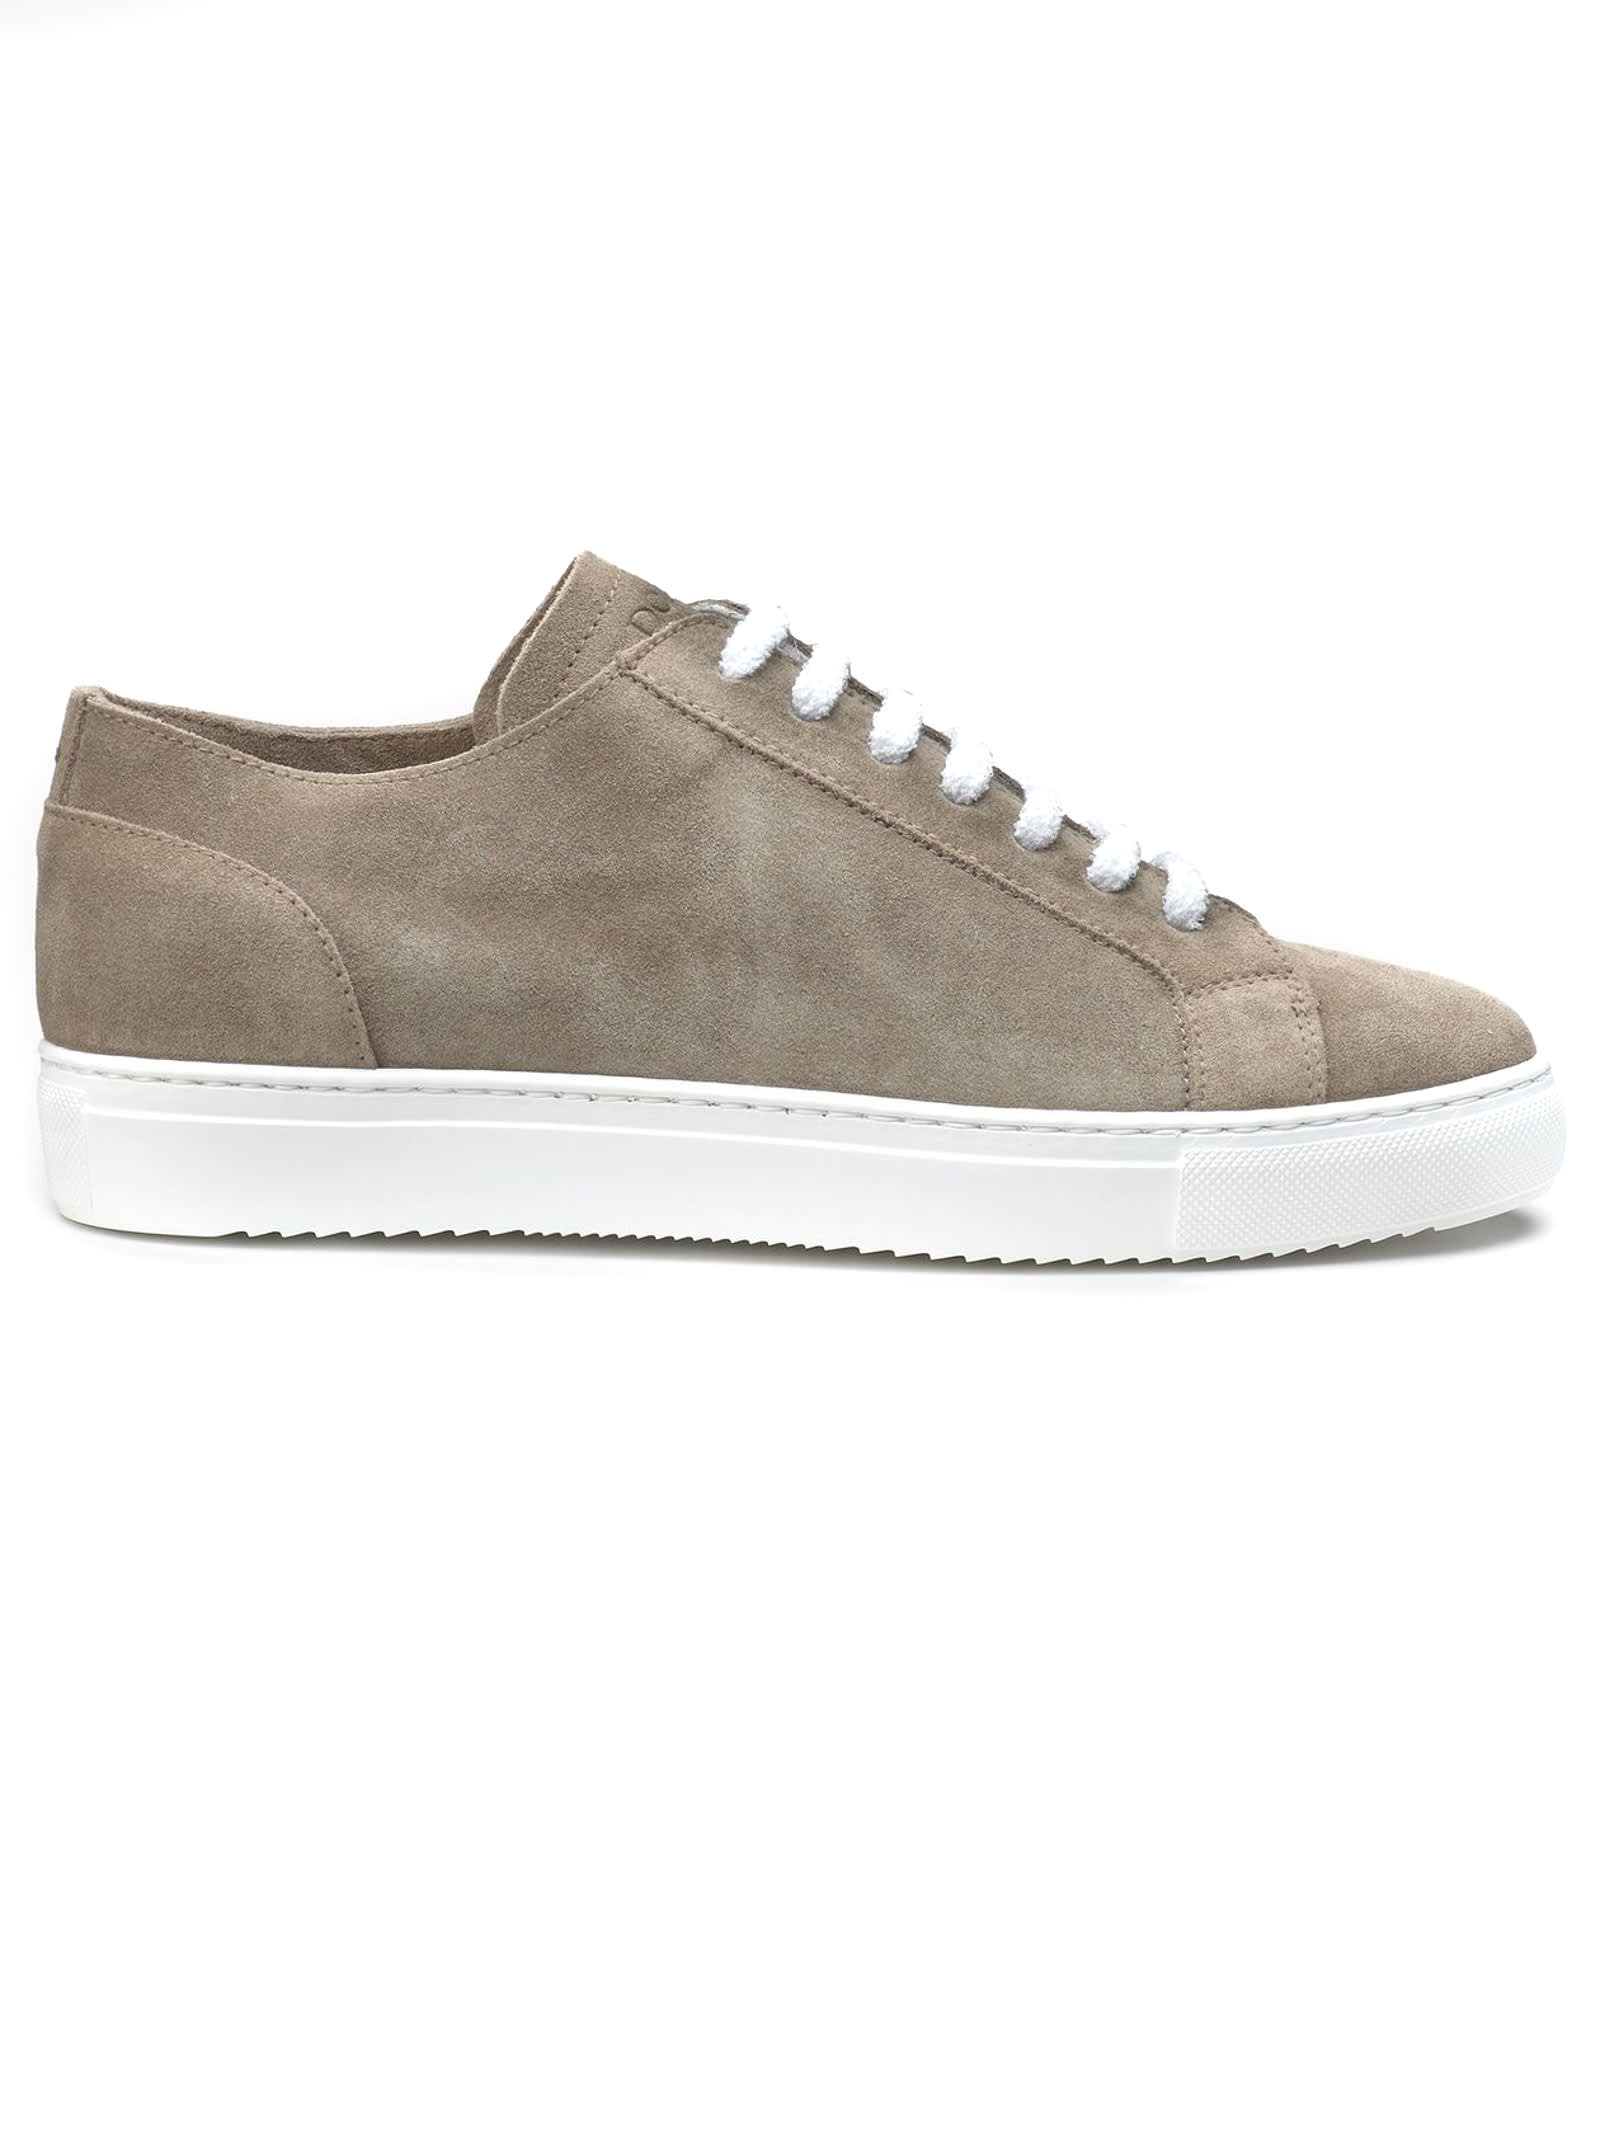 Doucal's Taupe Suede Sneakers